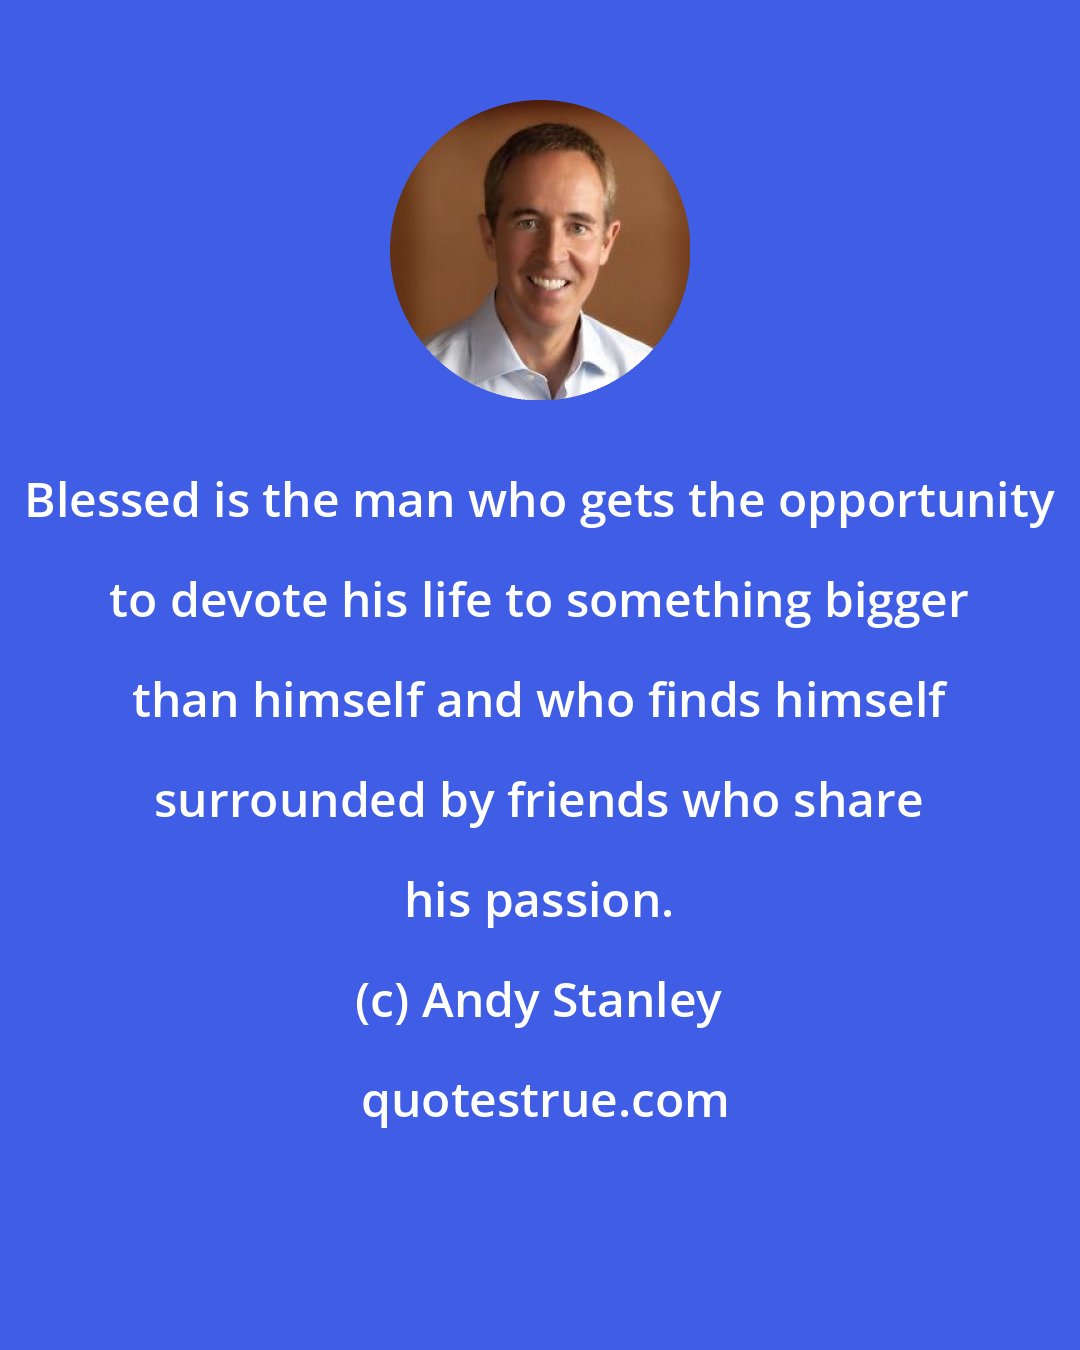 Andy Stanley: Blessed is the man who gets the opportunity to devote his life to something bigger than himself and who finds himself surrounded by friends who share his passion.